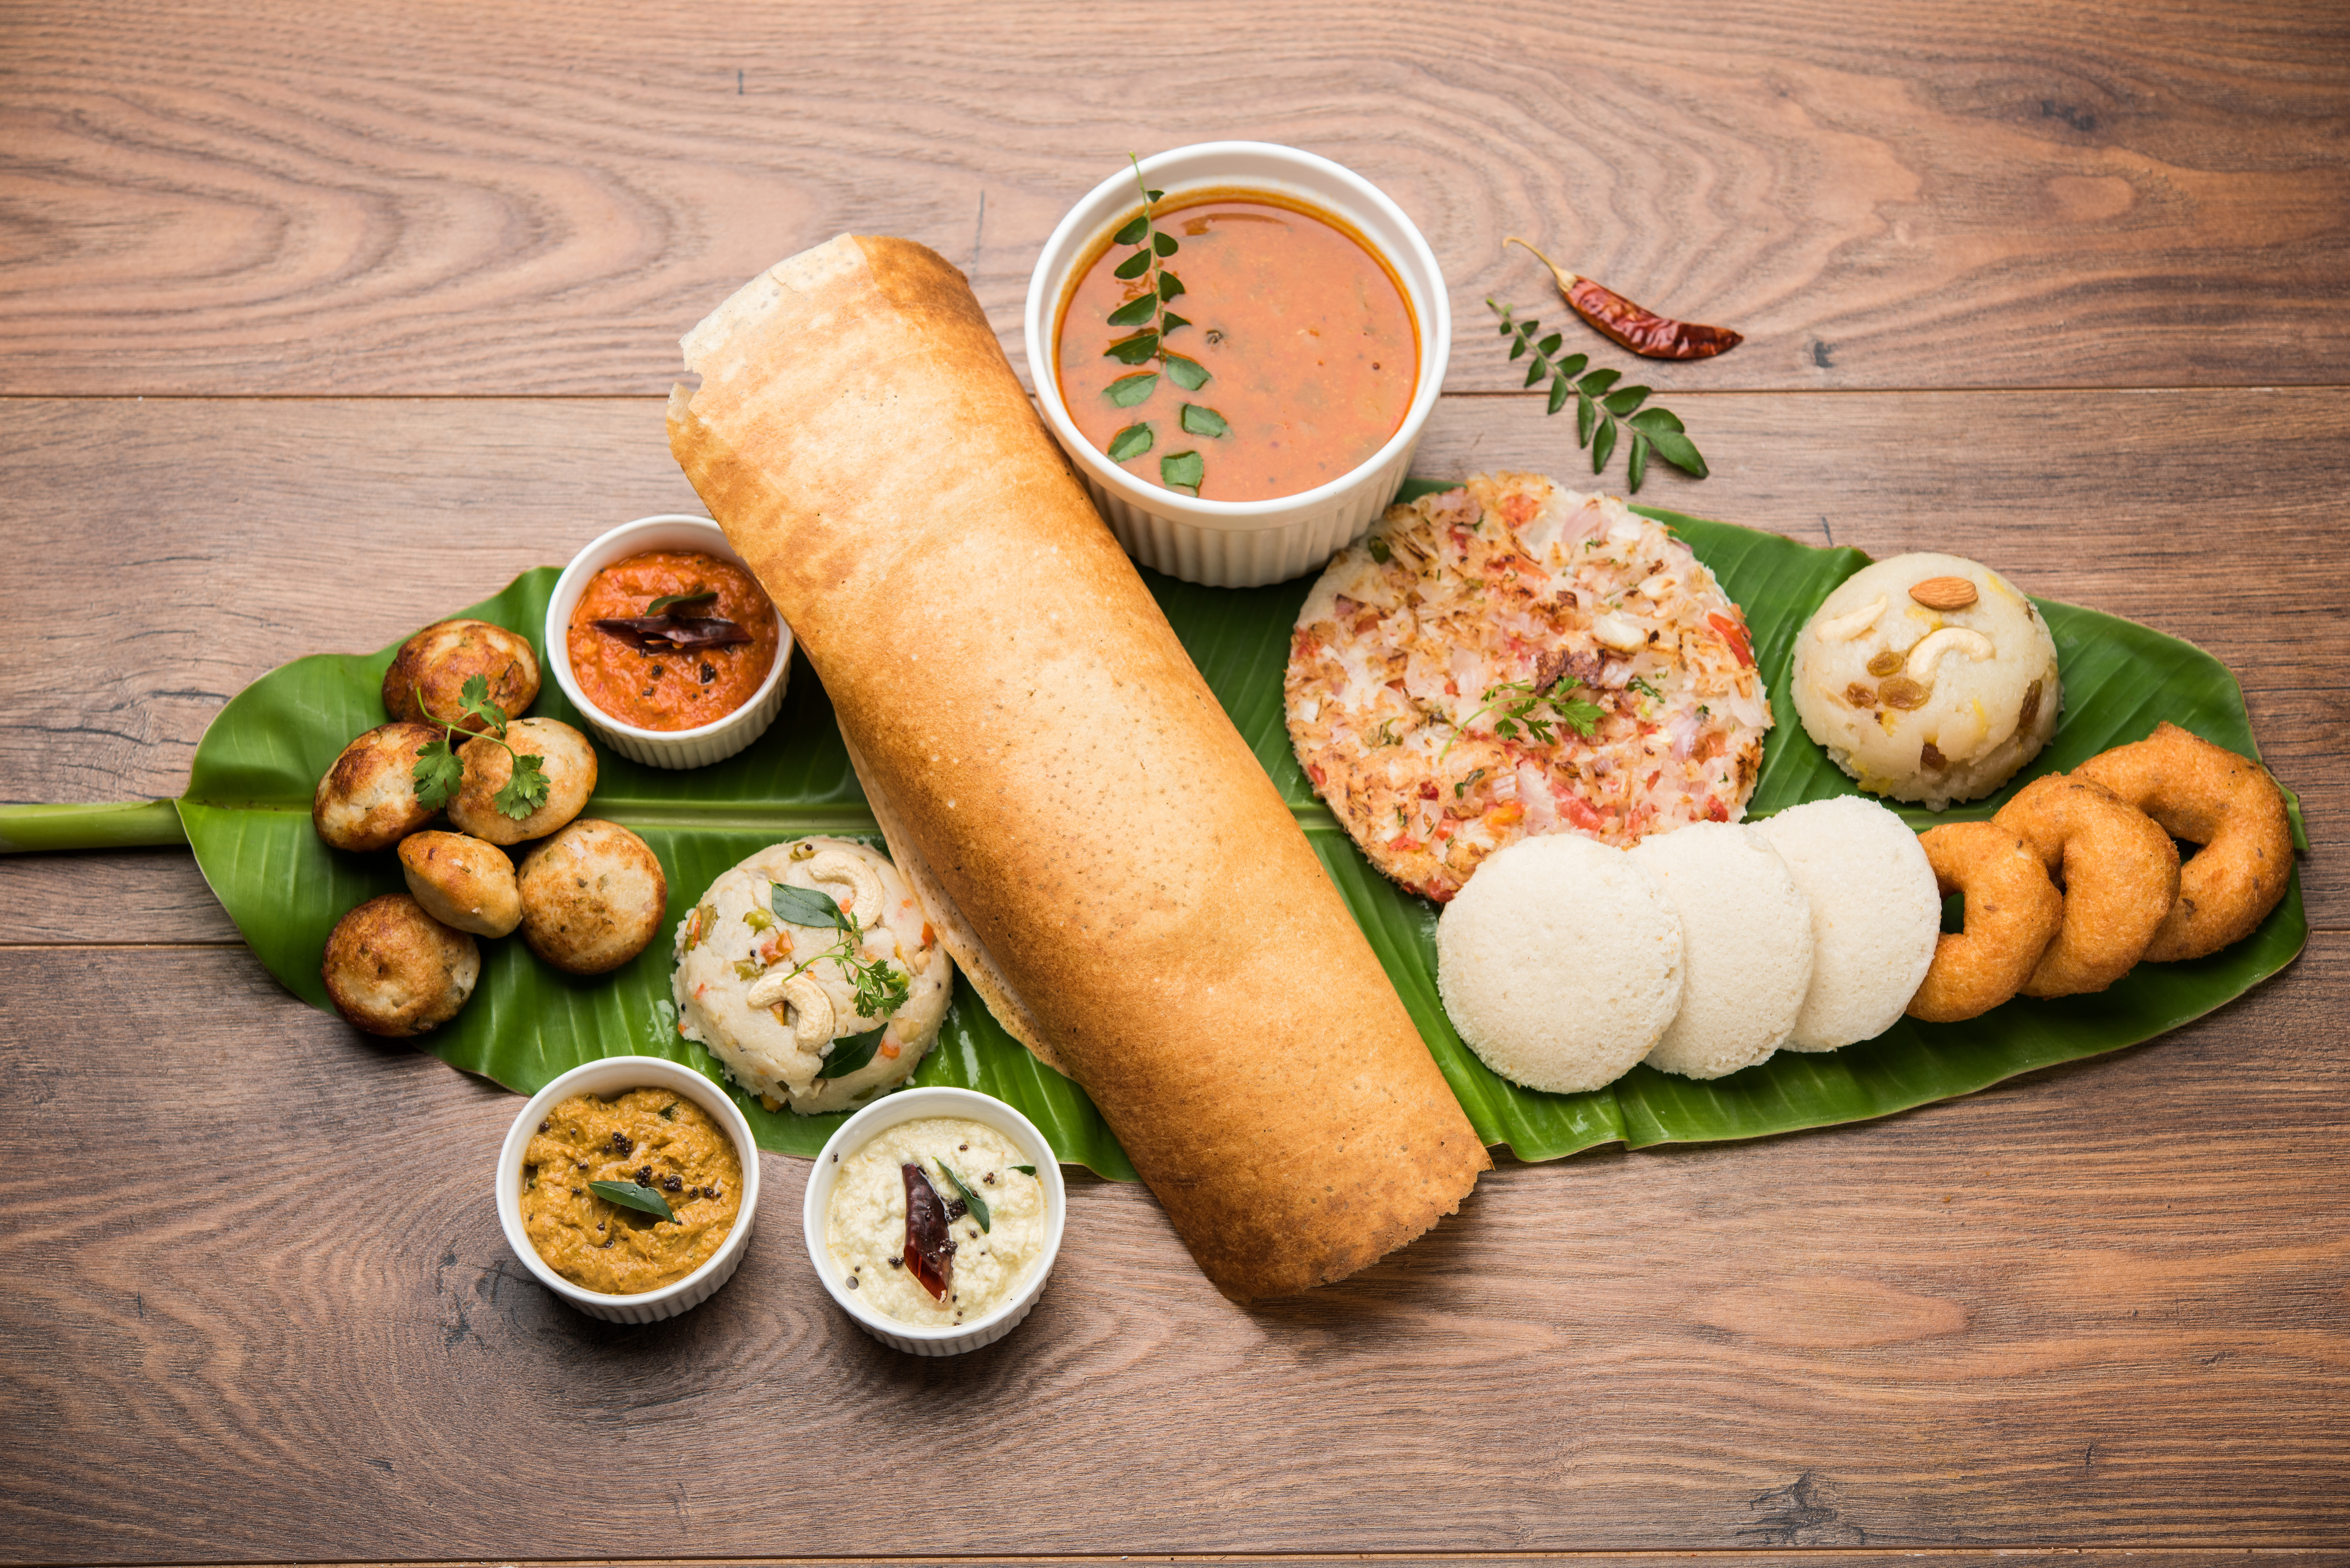 Idli and Dosa - Probiotic Indian foods